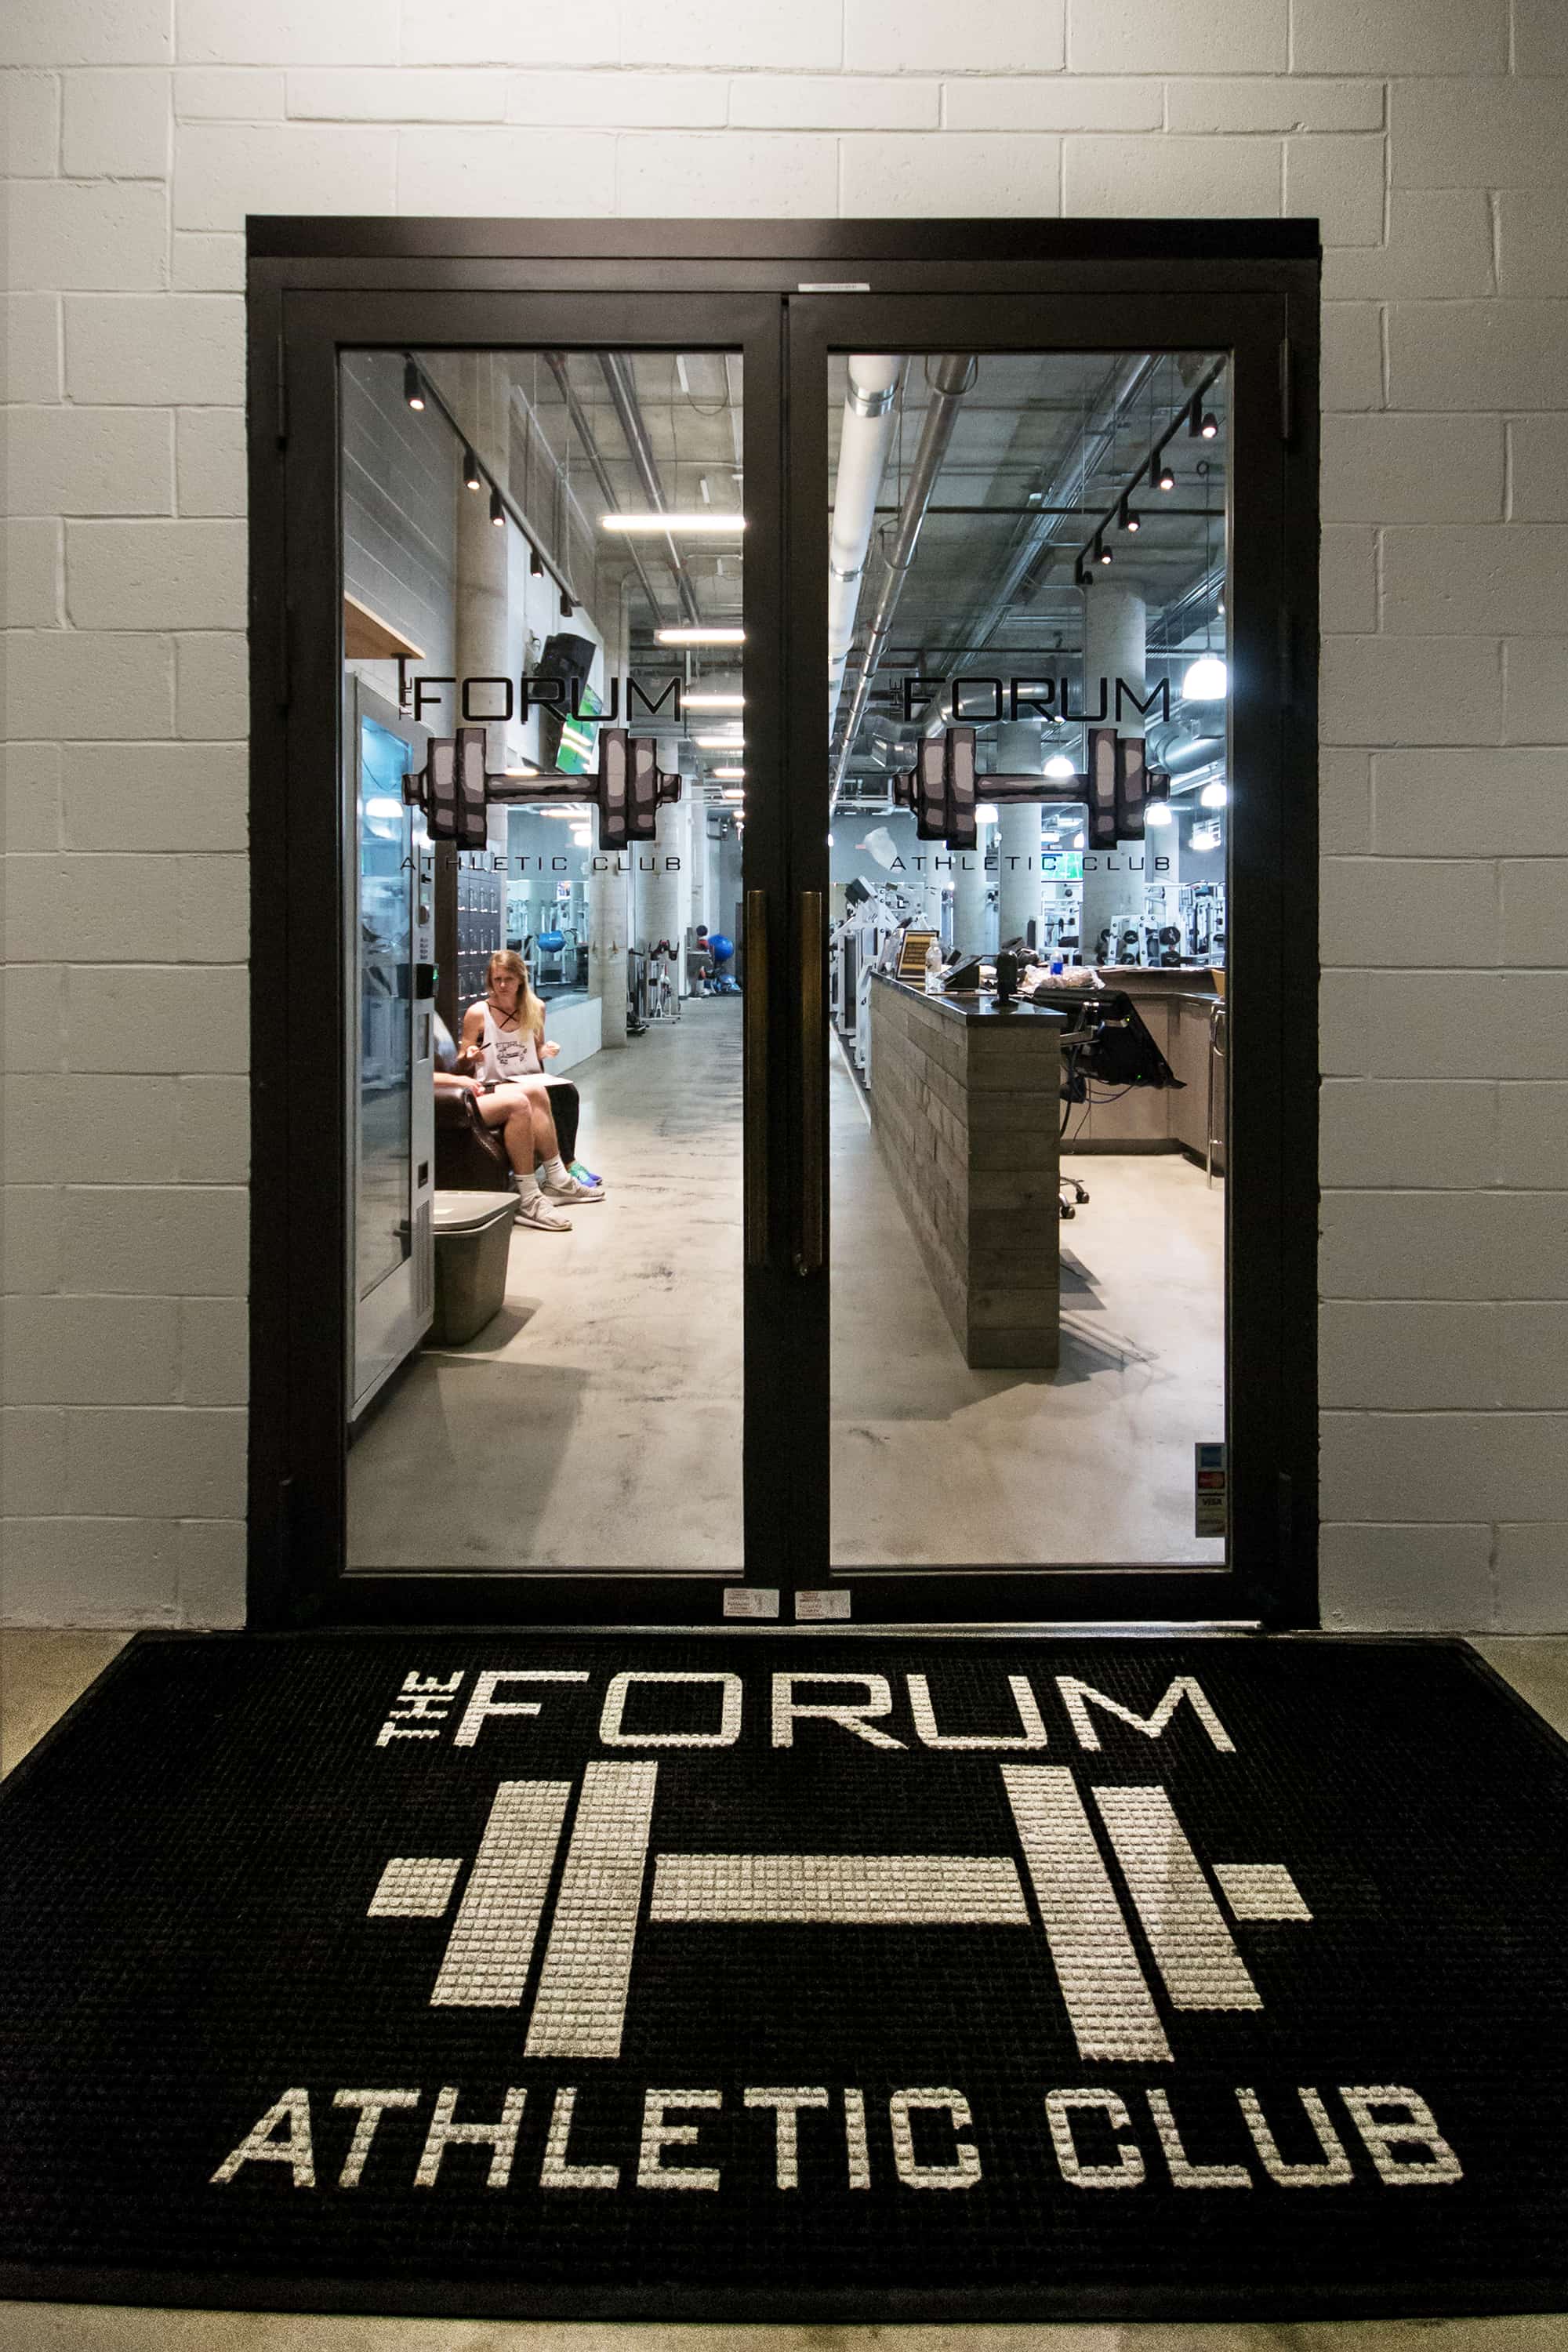 The entrance of the Forum Athletic Club.